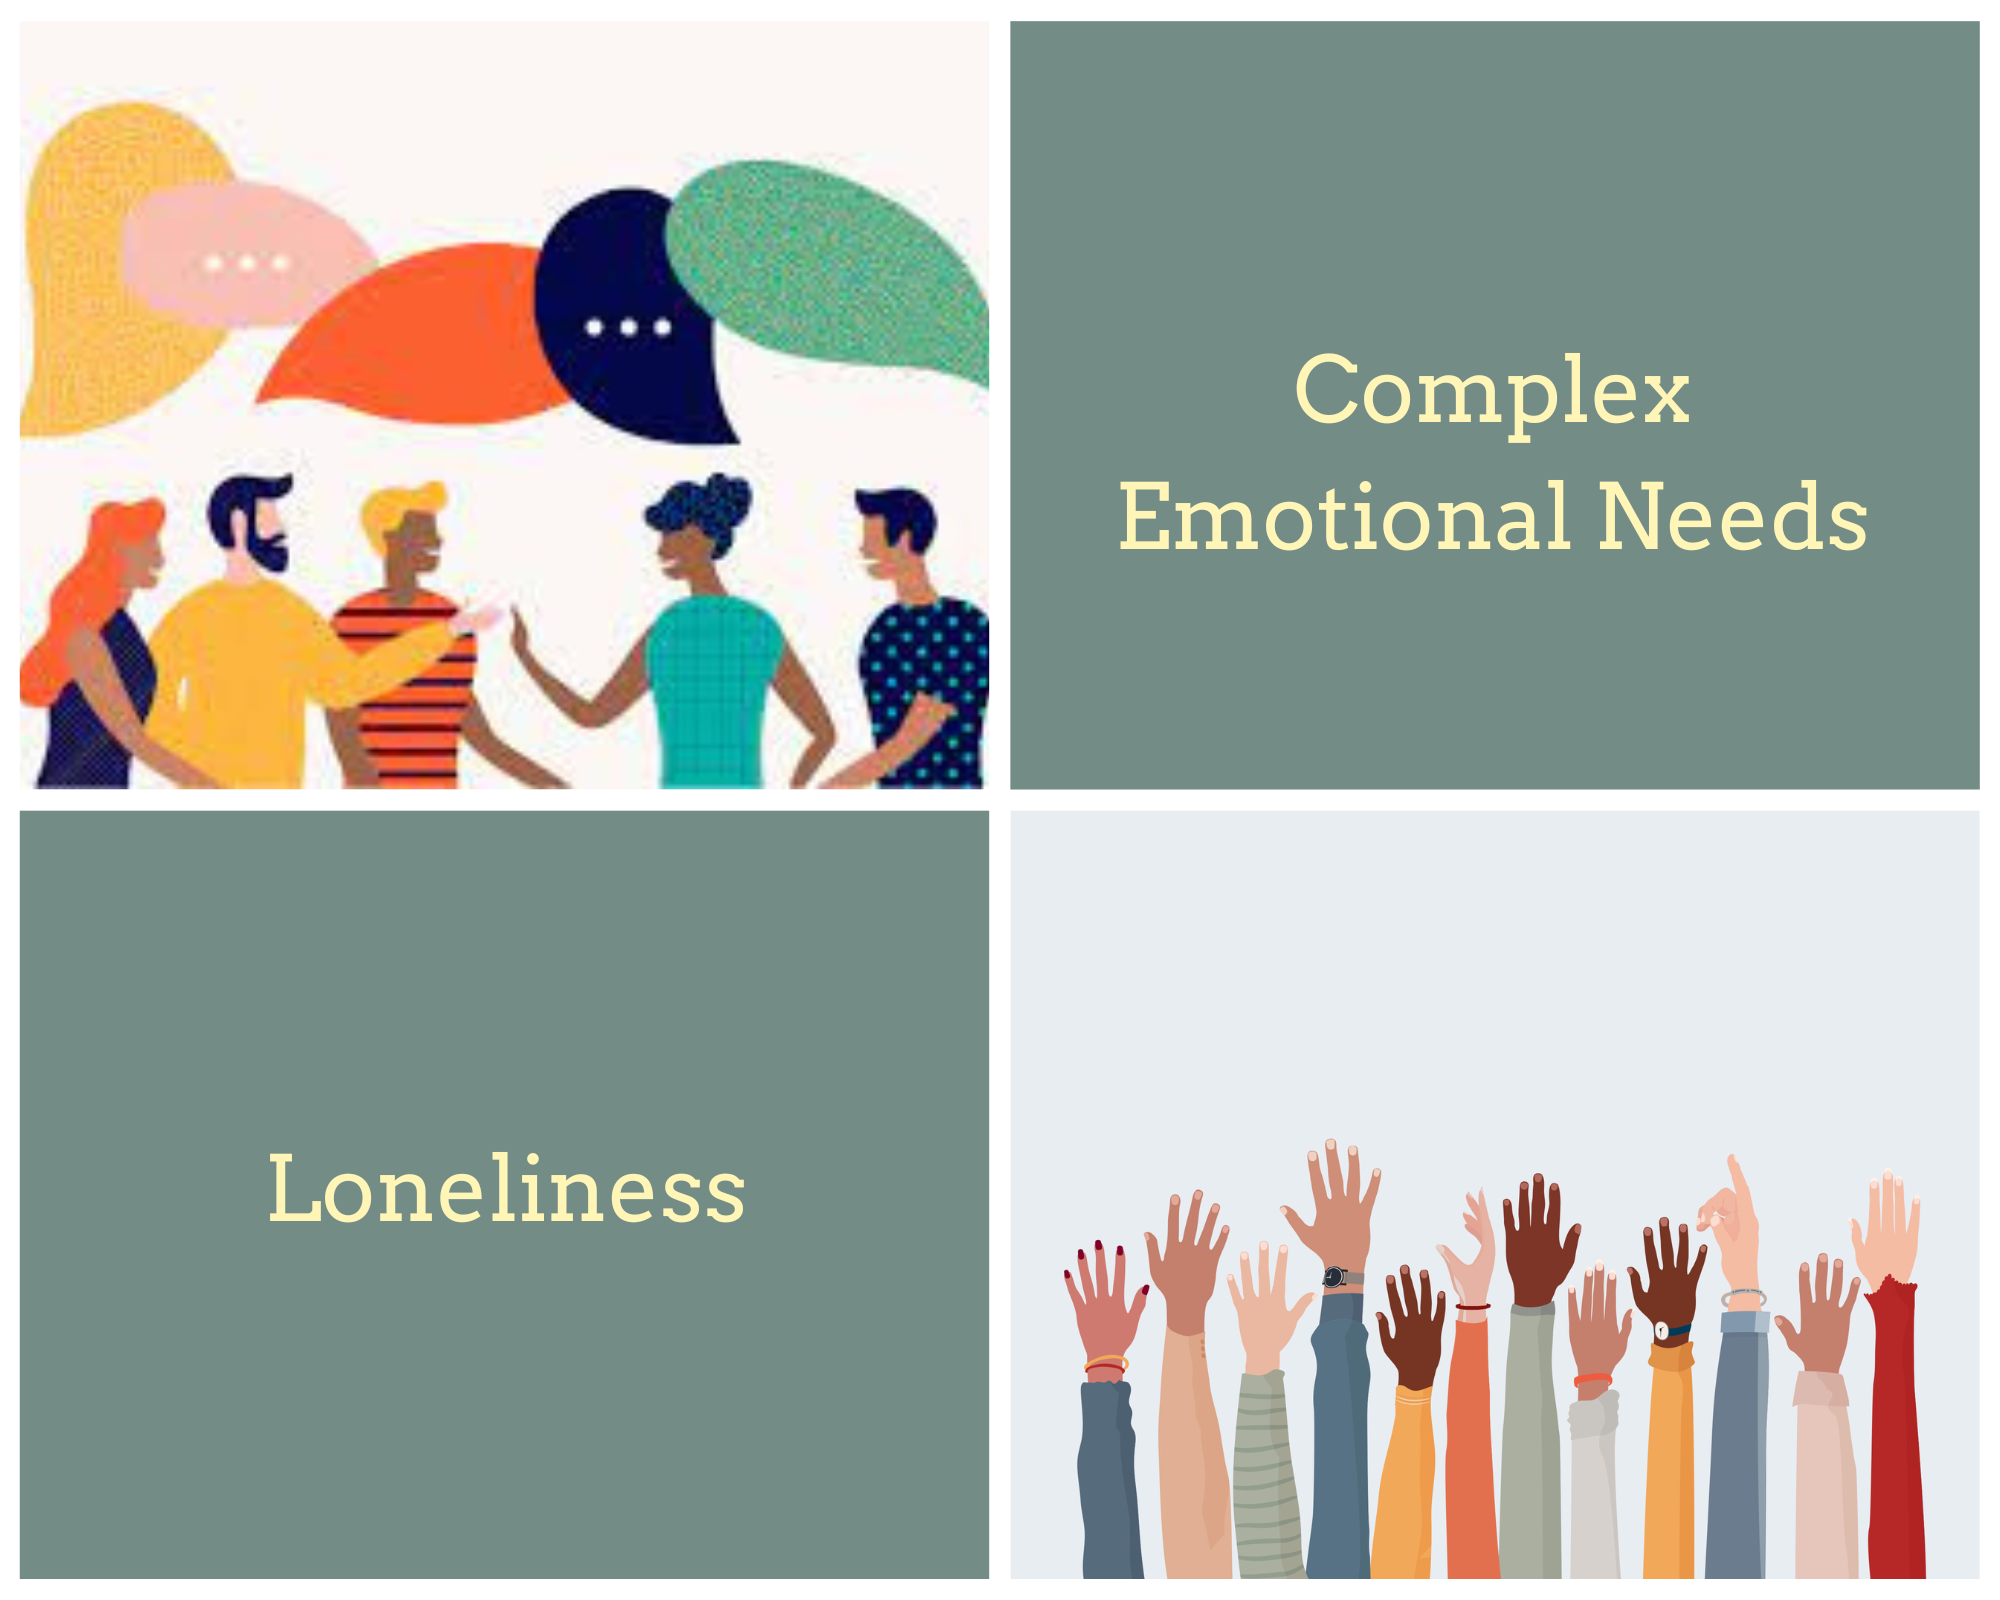 Loneliness and “Complex Emotional Needs” (CEN)